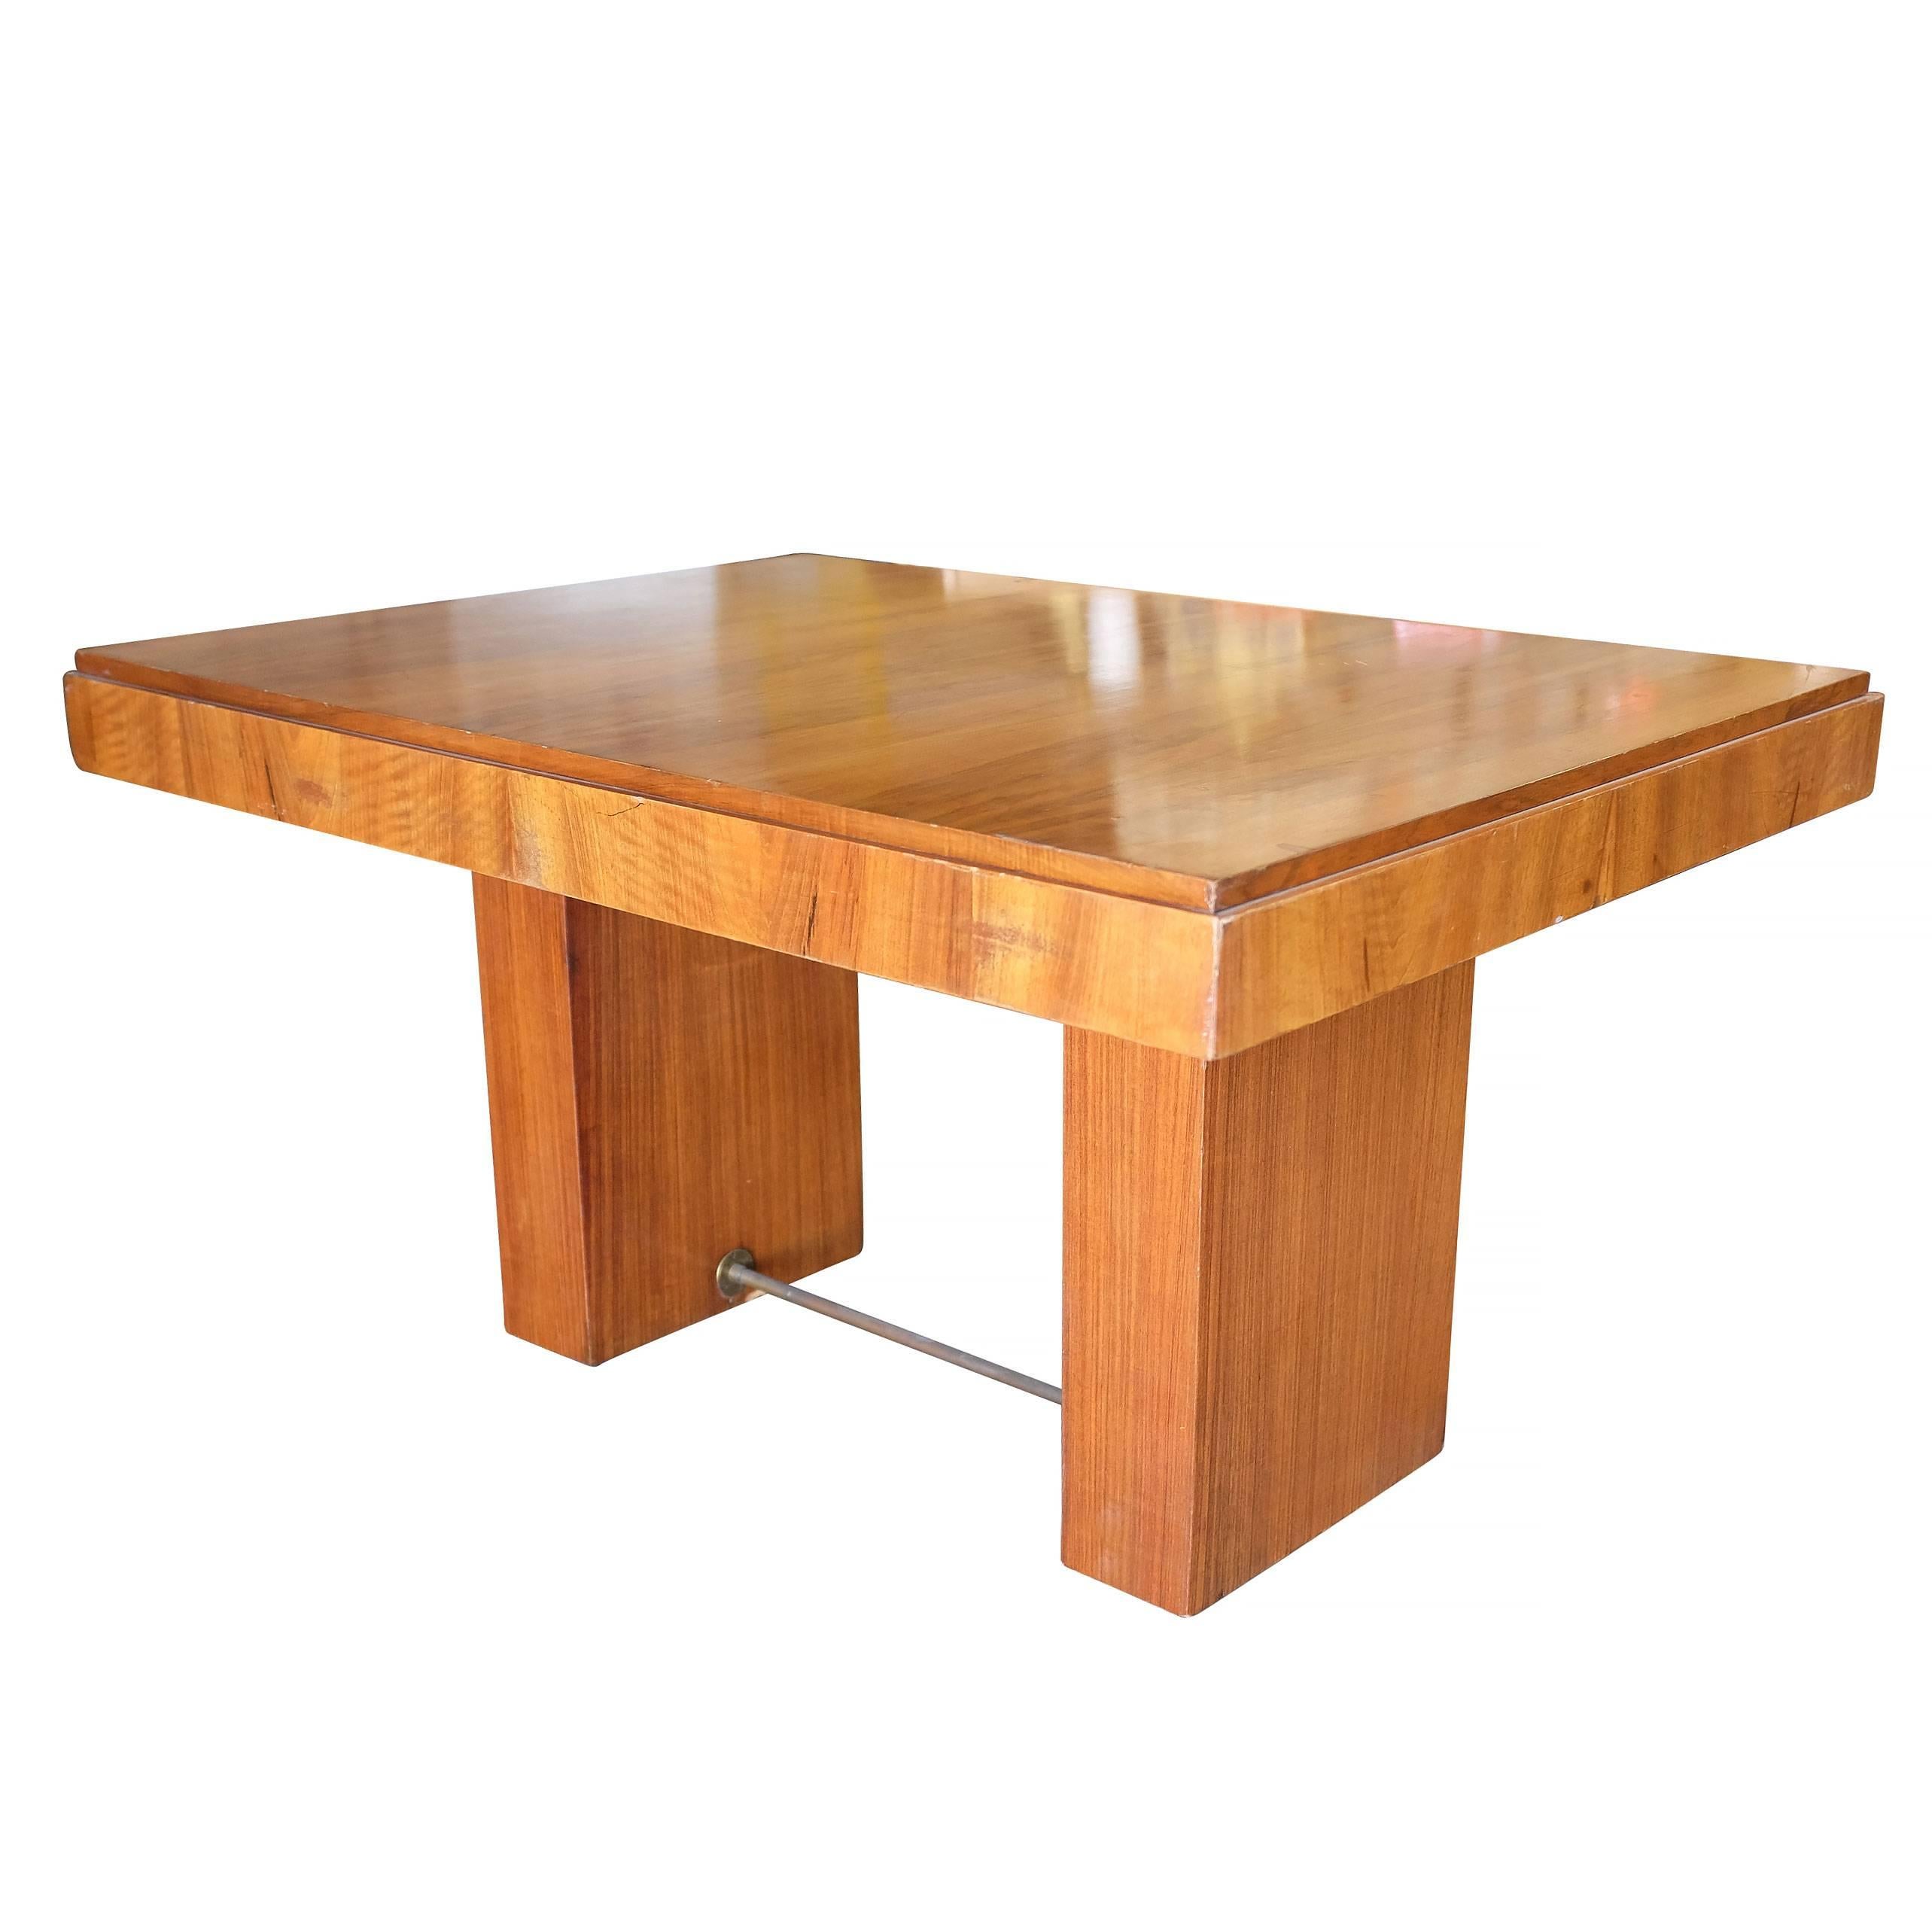 American Charles Dudouyt Cubist Inspired Walnut Desk / Dining Table